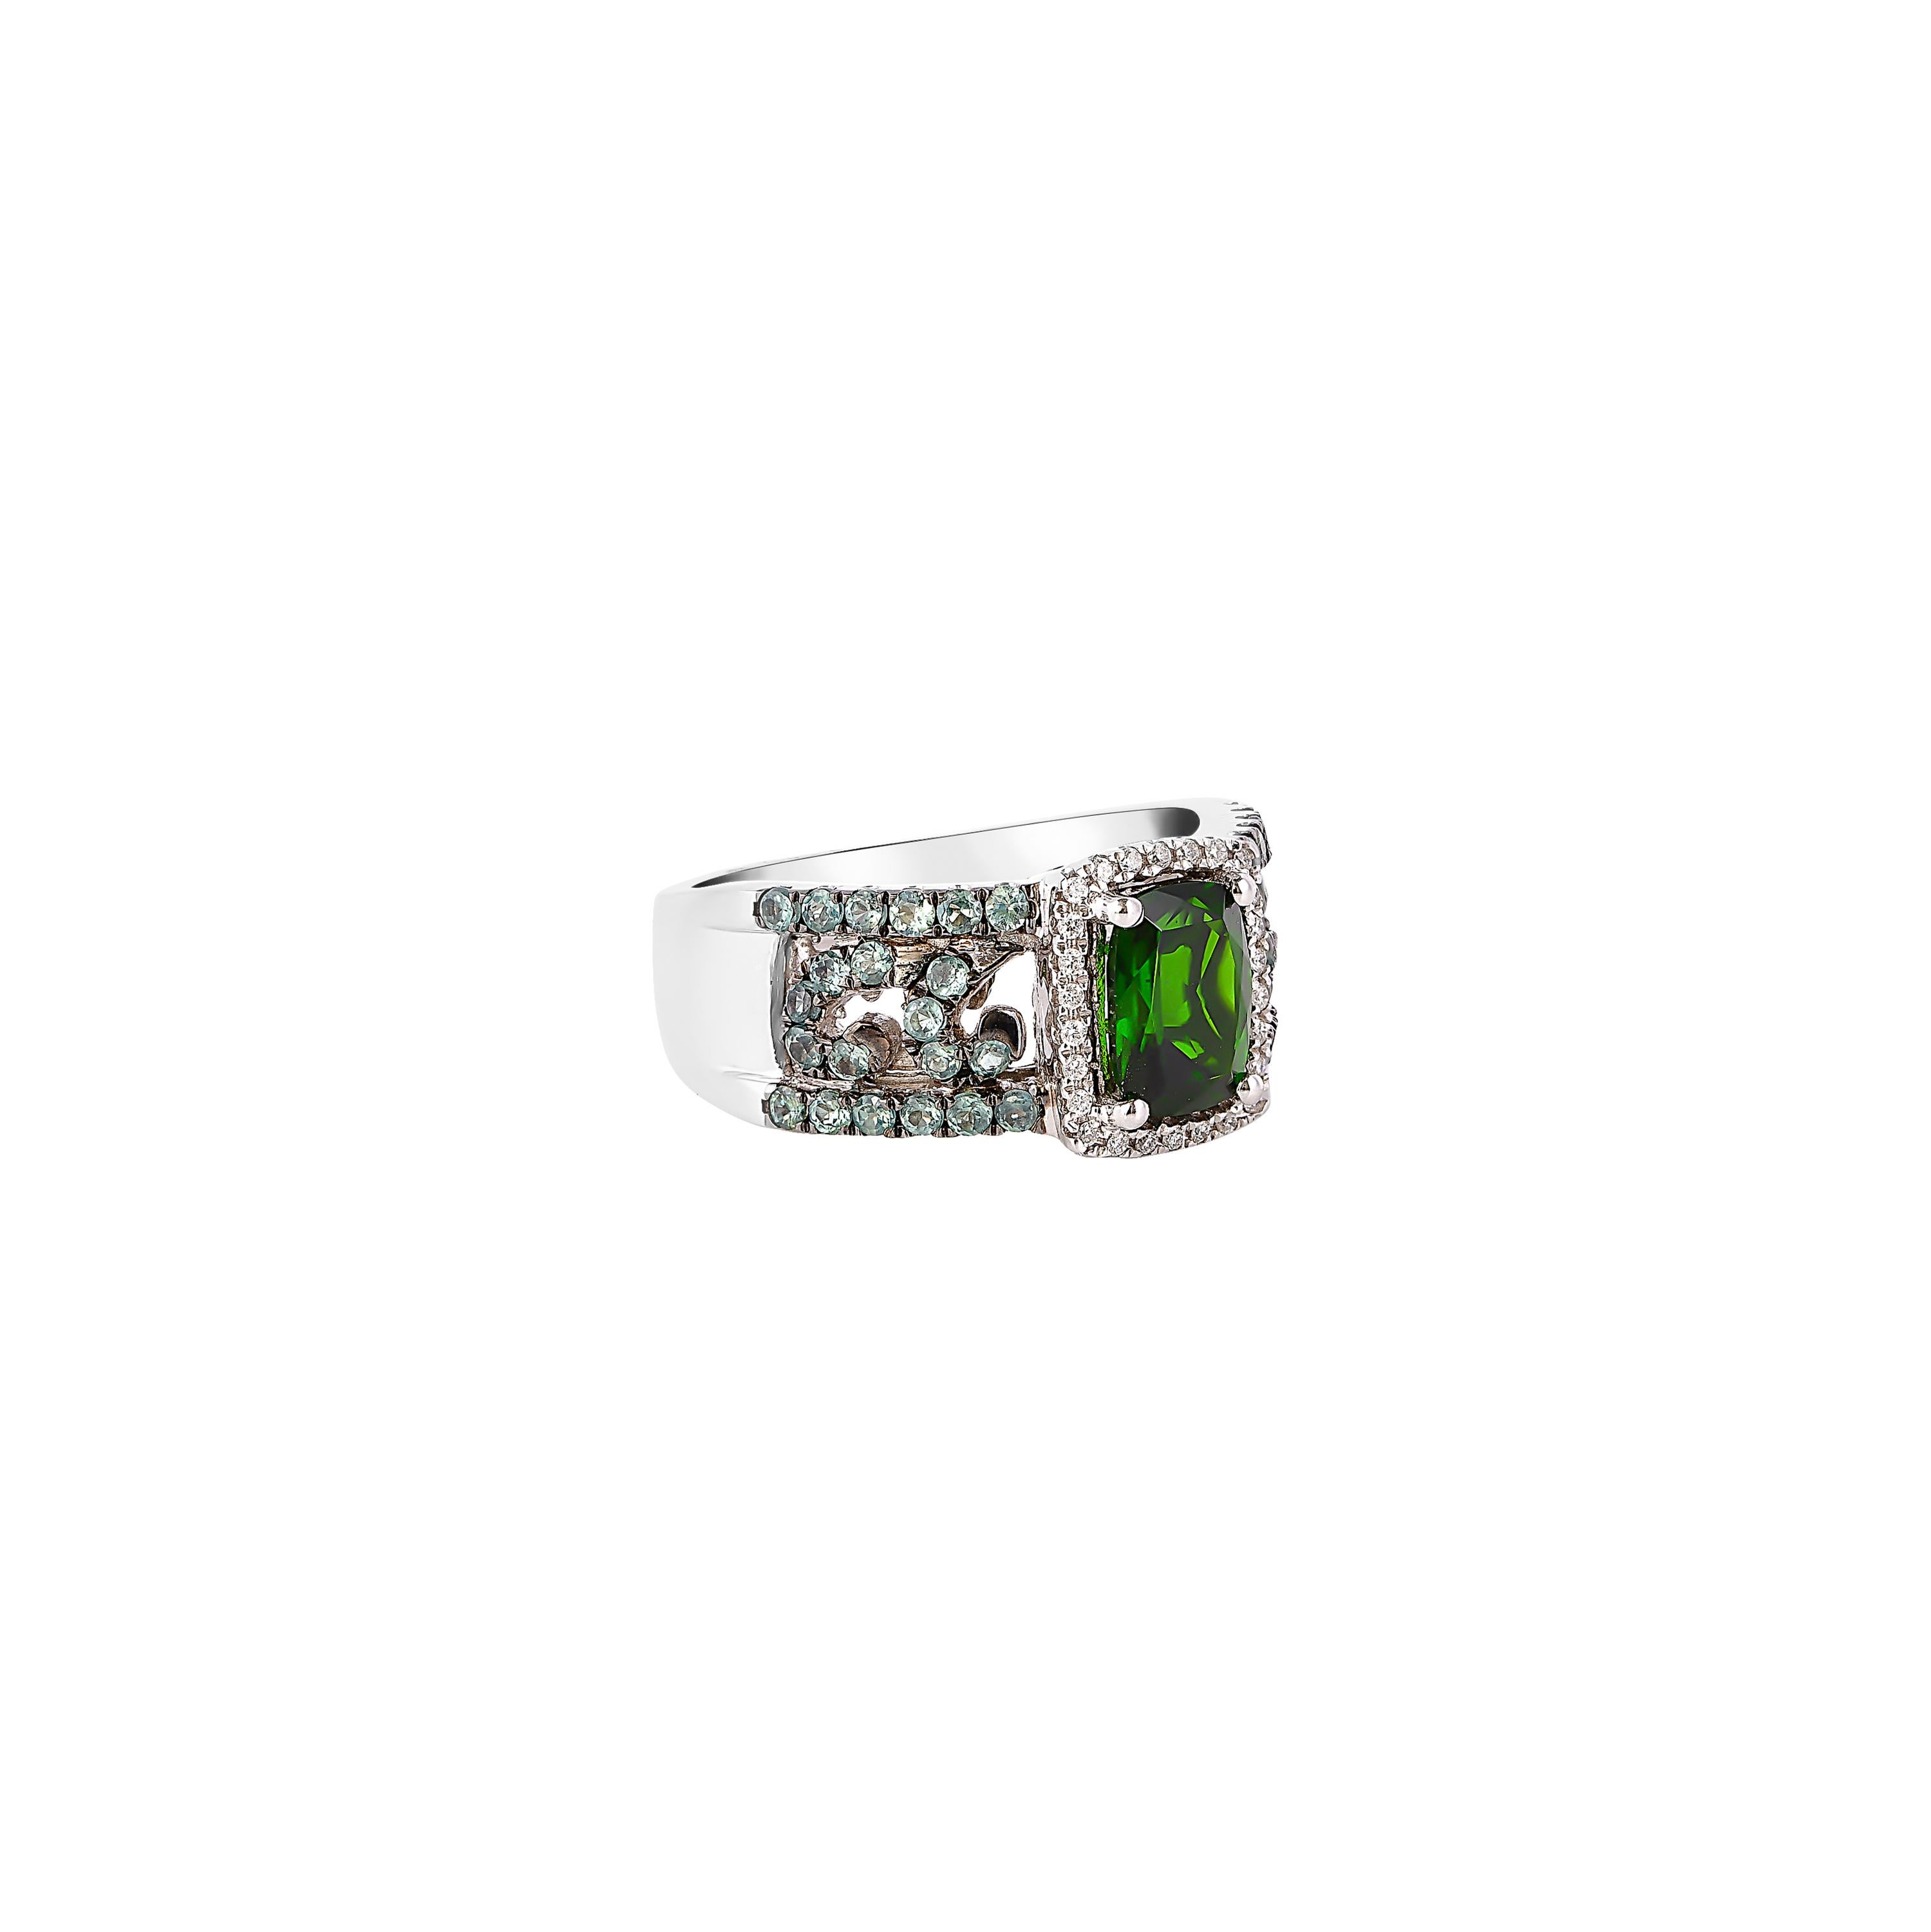 Unique and Designer Cocktail Rings by Sunita Nahata Fine Design.

Classic Chrome Diopside ring in 14K White gold with Alexandrite and Diamonds. 

Chrome Diopside: 1.50 carat, 6X8mm size, Cushion shape.
Alexandrite: 0.693 carat, 1.50mm size, round